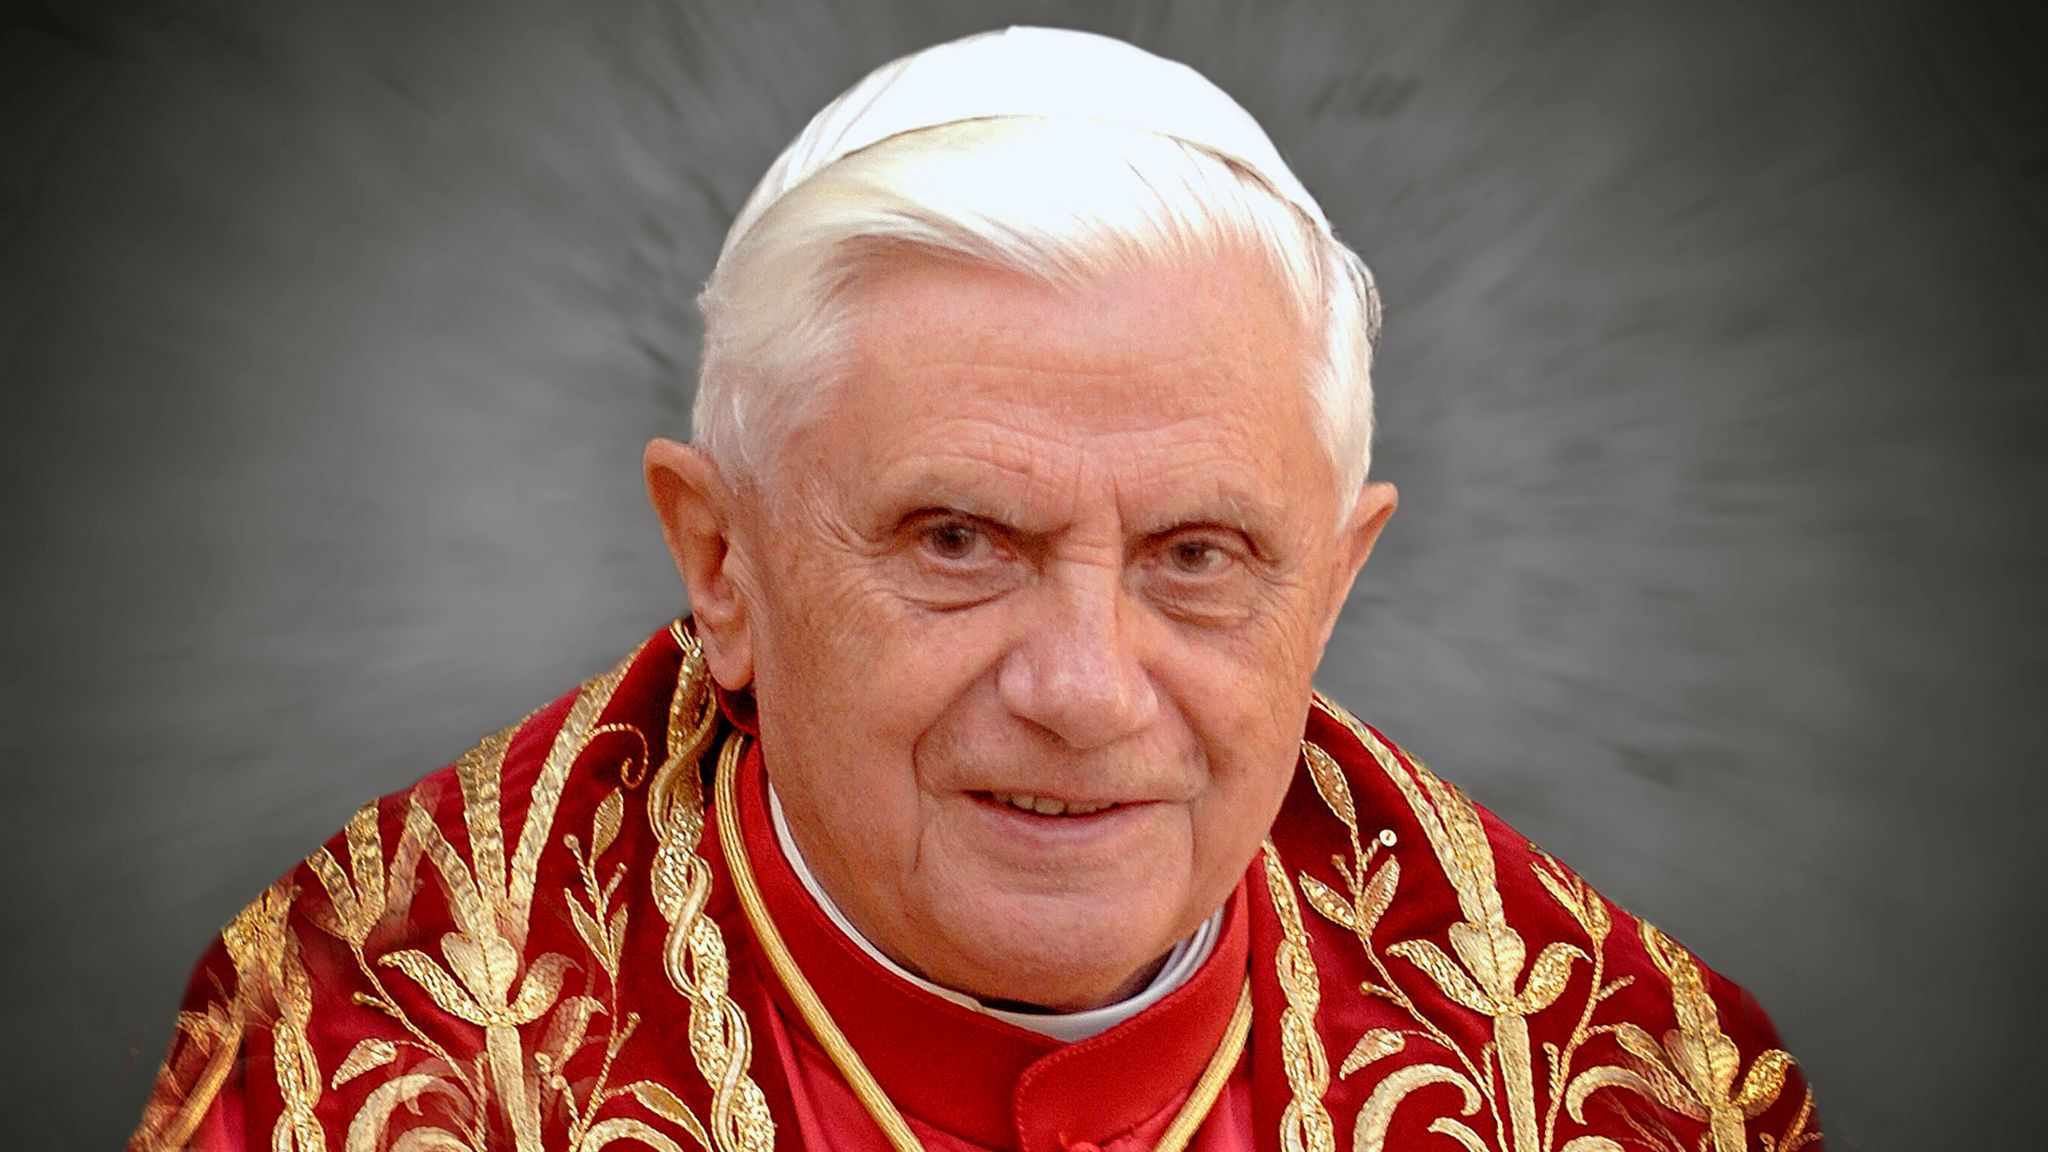 Former Pope Benedict XVI 'stable' and able to 'rest well' overnight, Vatican says